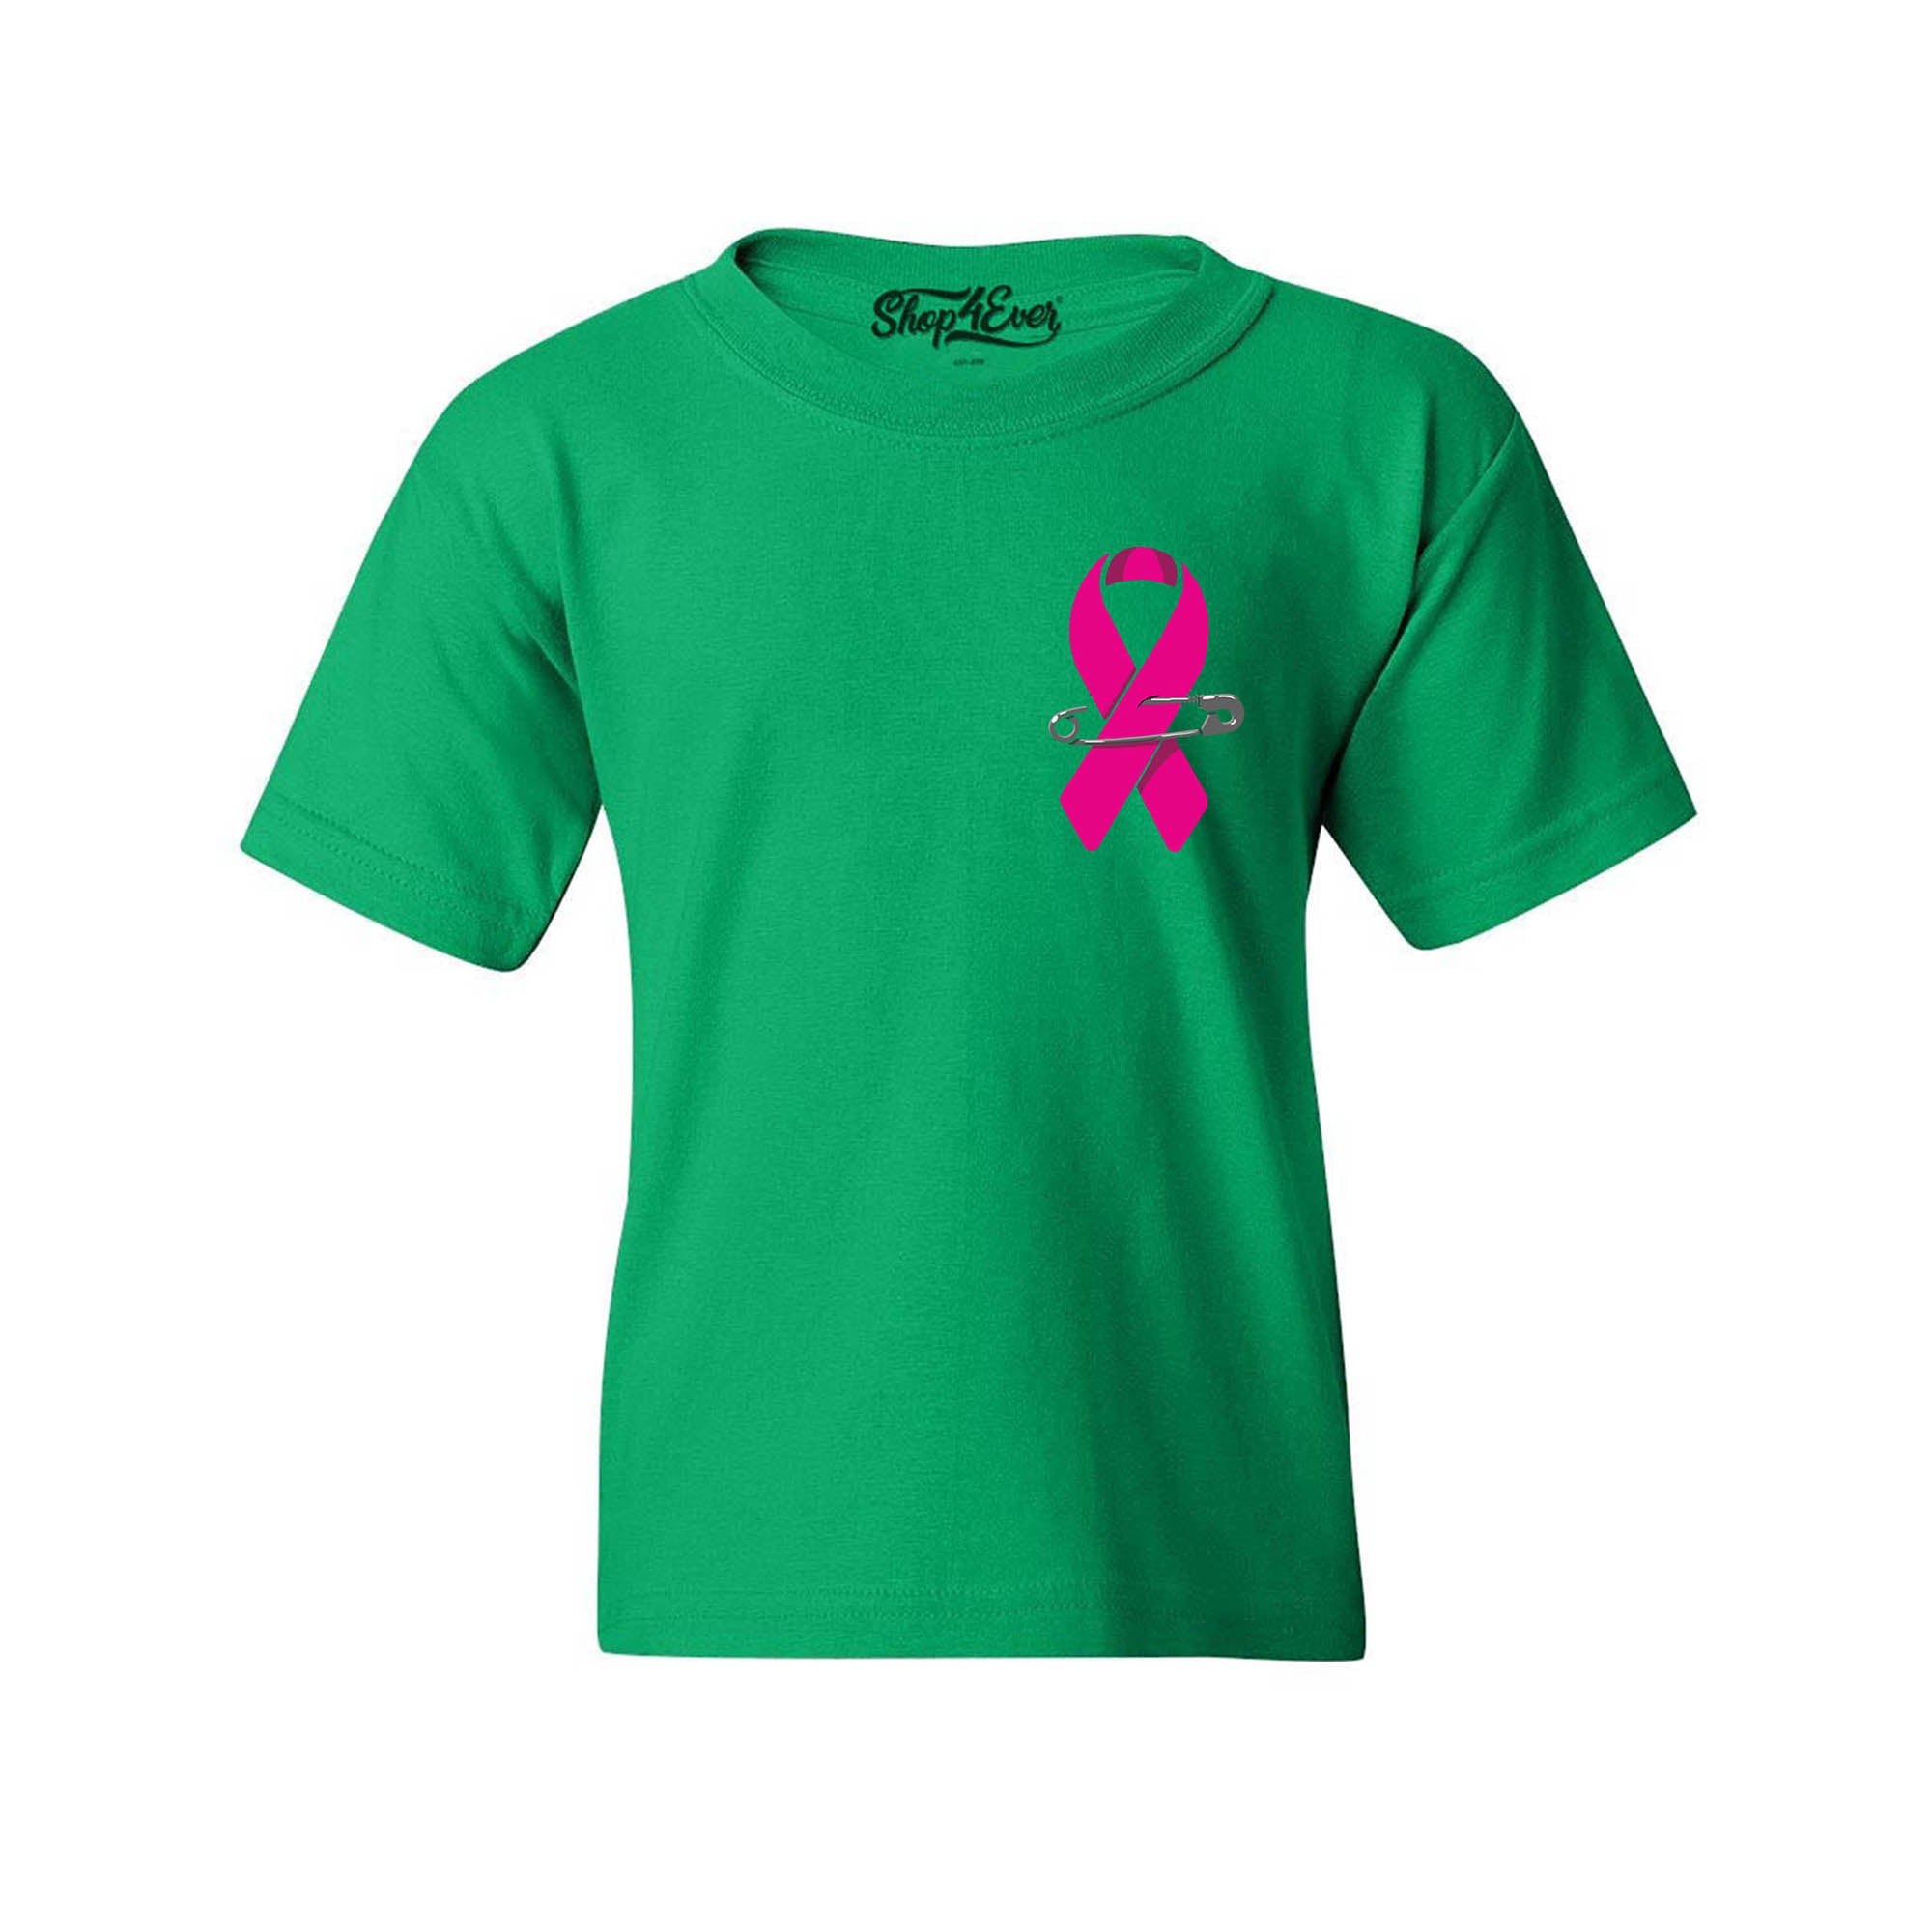 Pink Breast Cancer Ribbon Pin Youth's T-Shirt Support Awareness Child's Tee